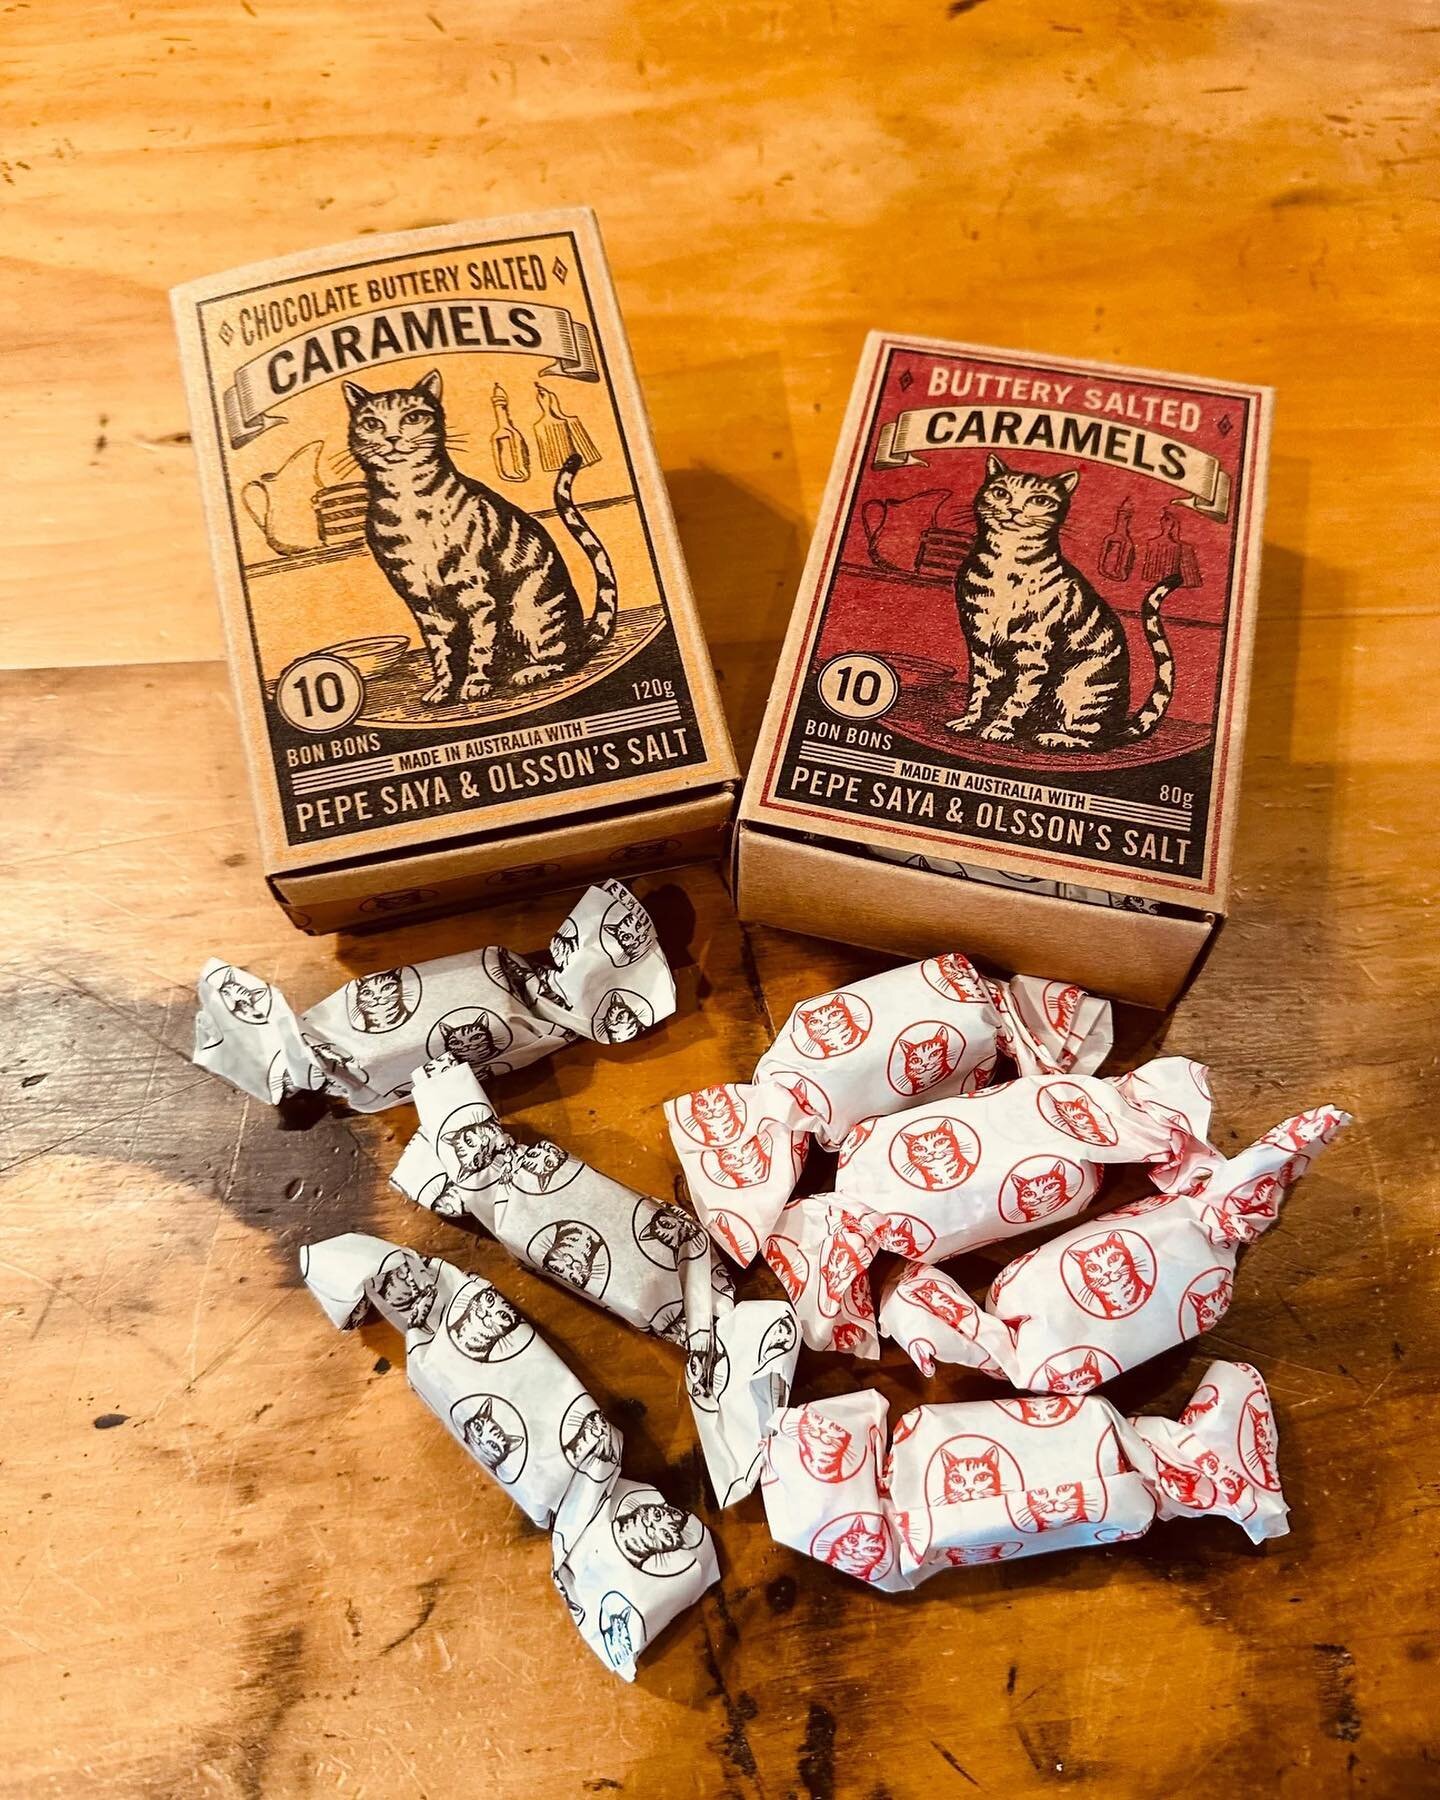 Not using Insta-perbole when I say these are the best caramel treats on the planet. I&rsquo;ve just ordered a couple of boxes from @molongstores which reminded me that I should share it with you in case you are looking for chocolate alternatives for 